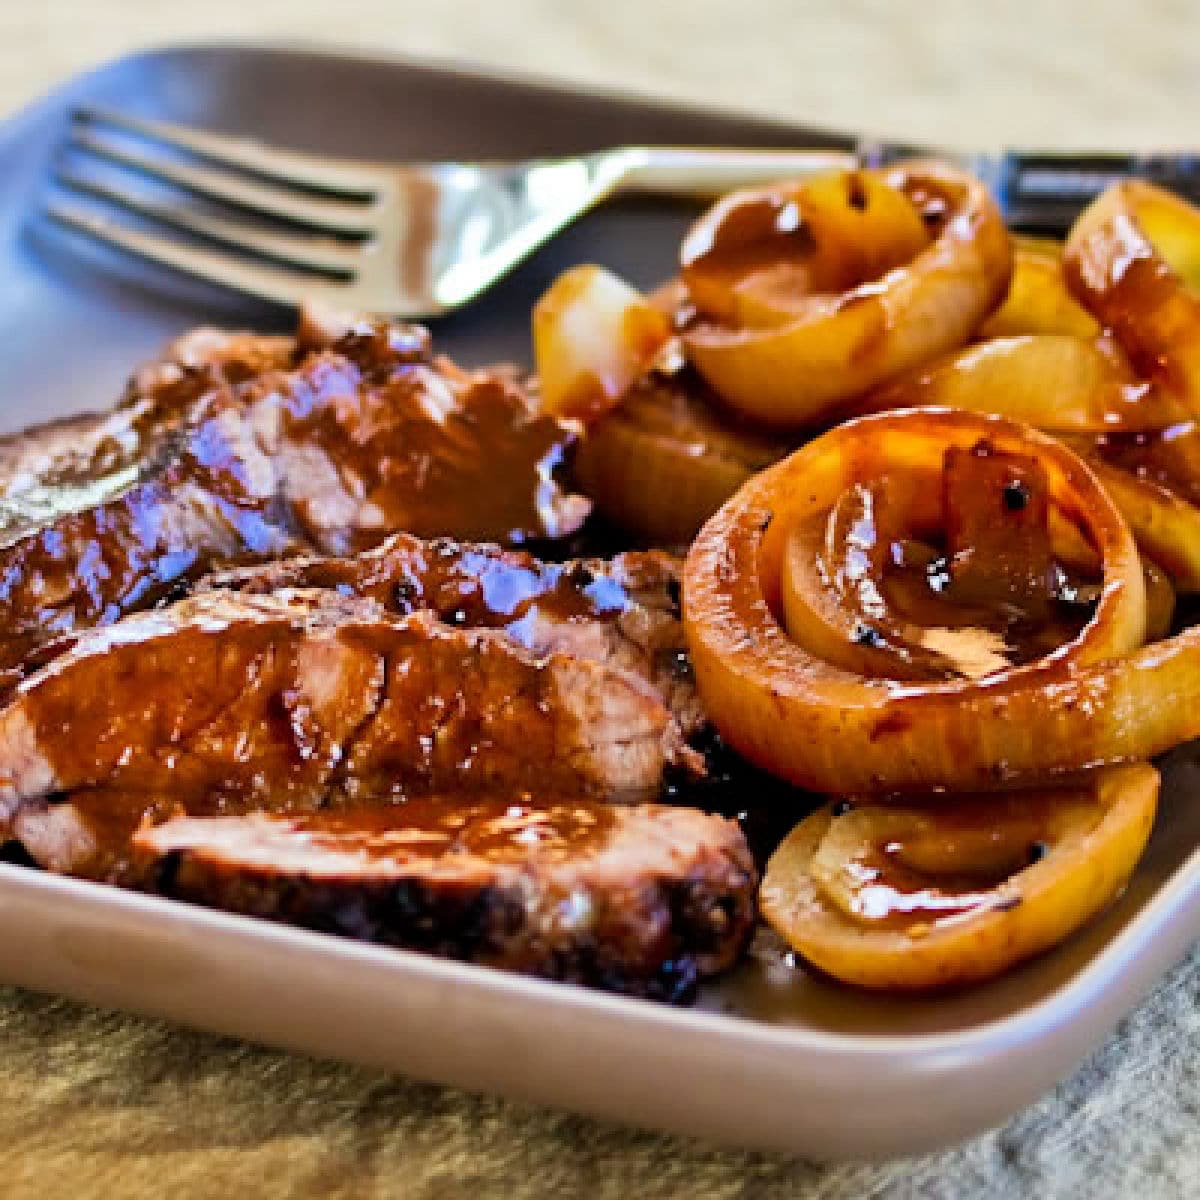 Square image for Slow Cooker Balsamic Pot Roast shown on plate with onions and sauce.